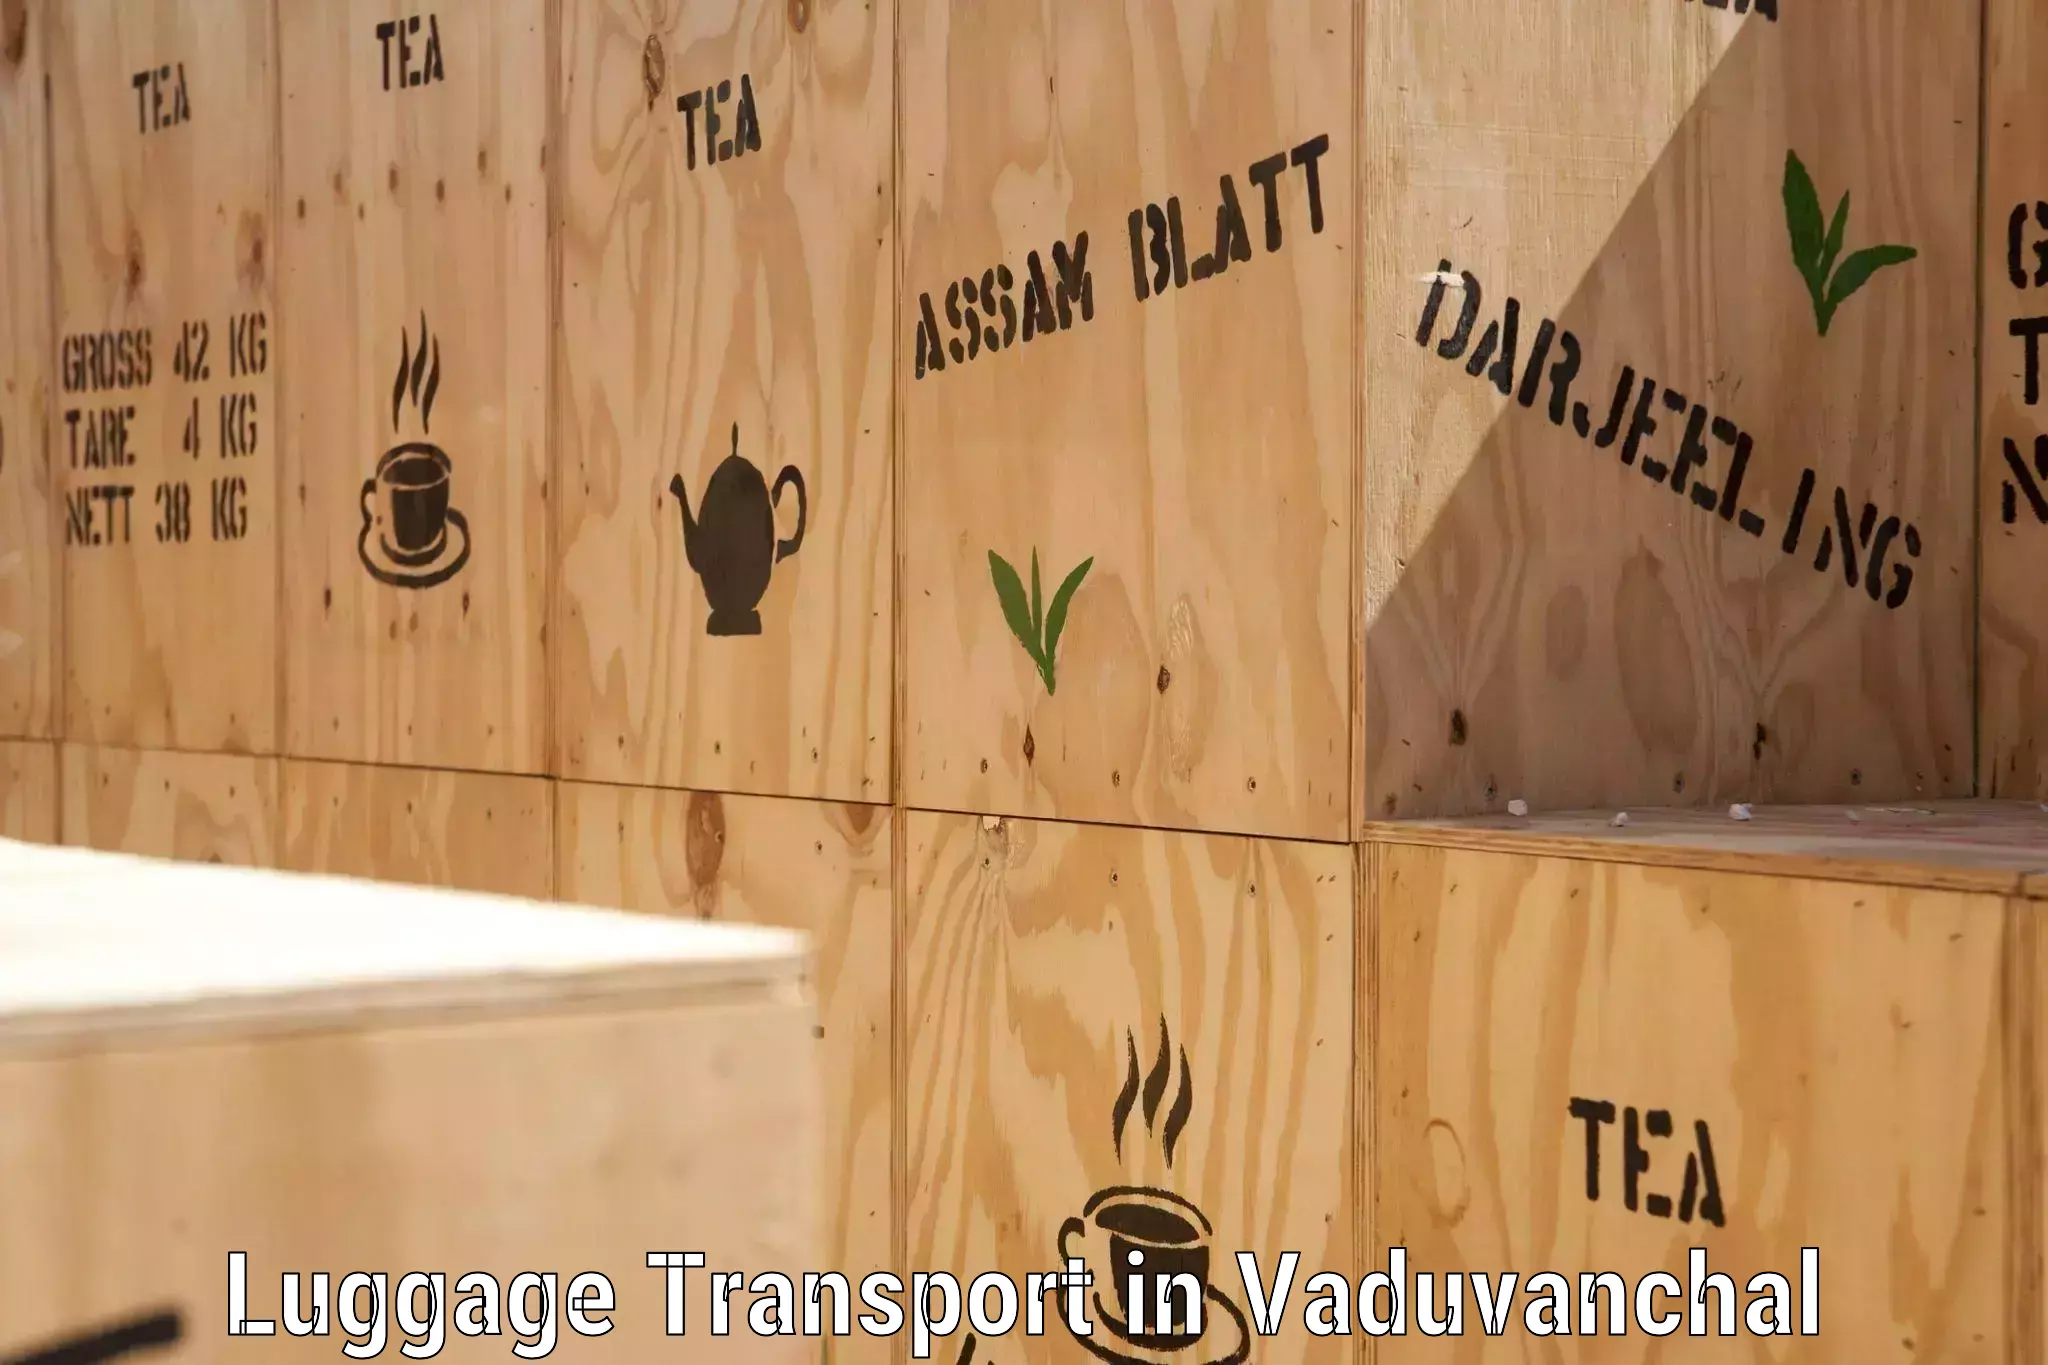 Luggage transport solutions in Vaduvanchal